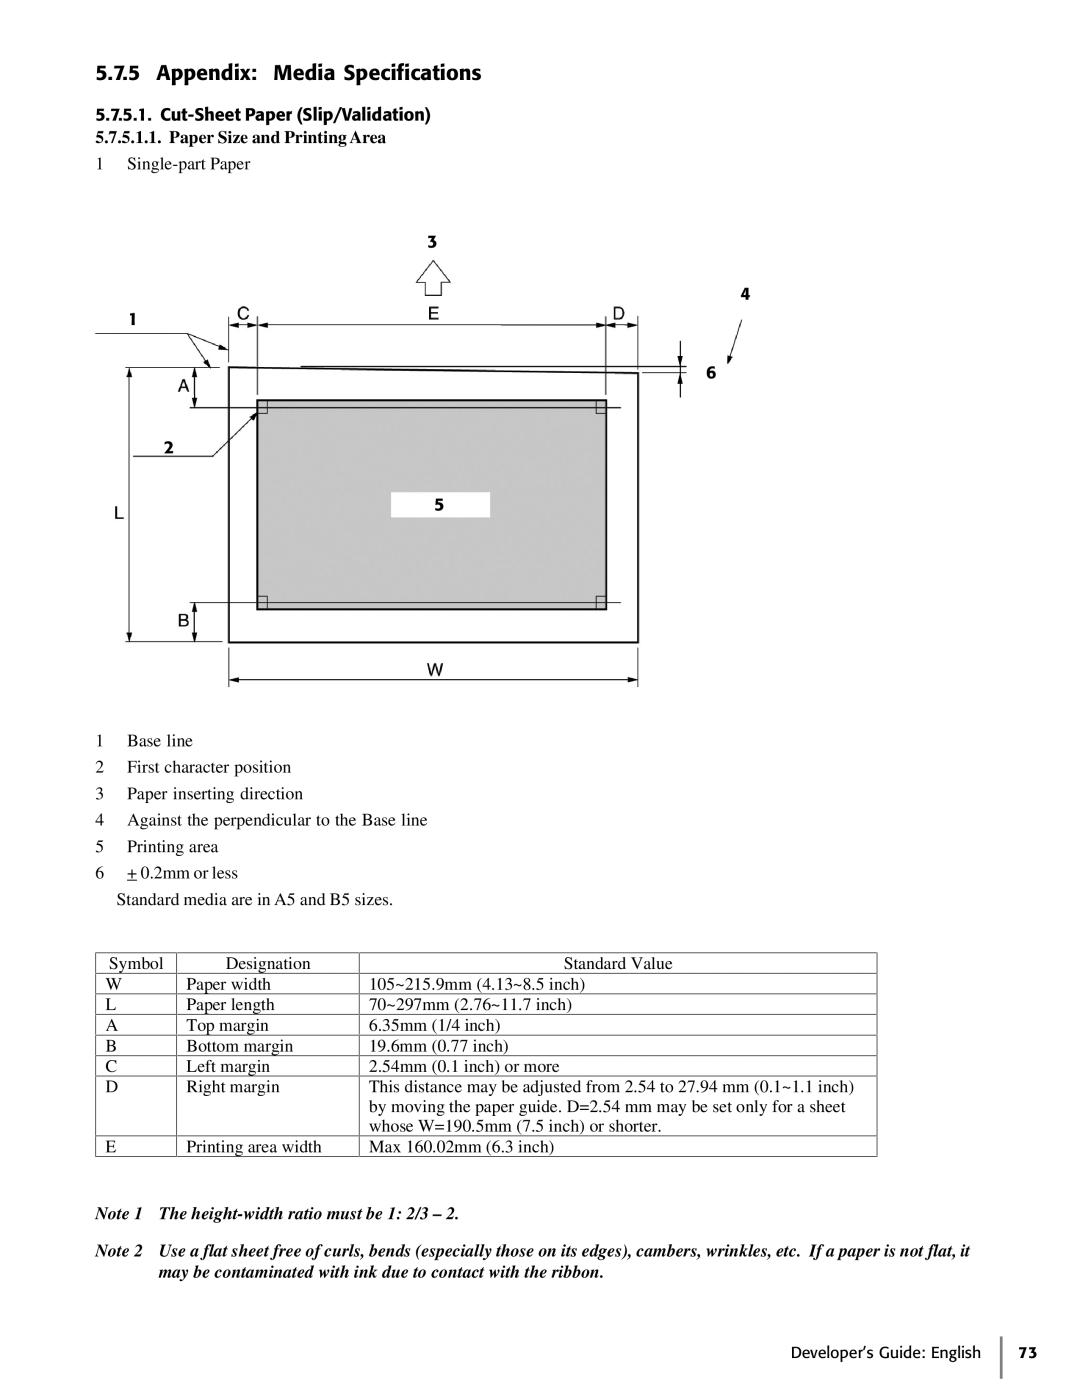 Oki 425D manual Appendix Media Specifications, Paper Size and Printing Area 